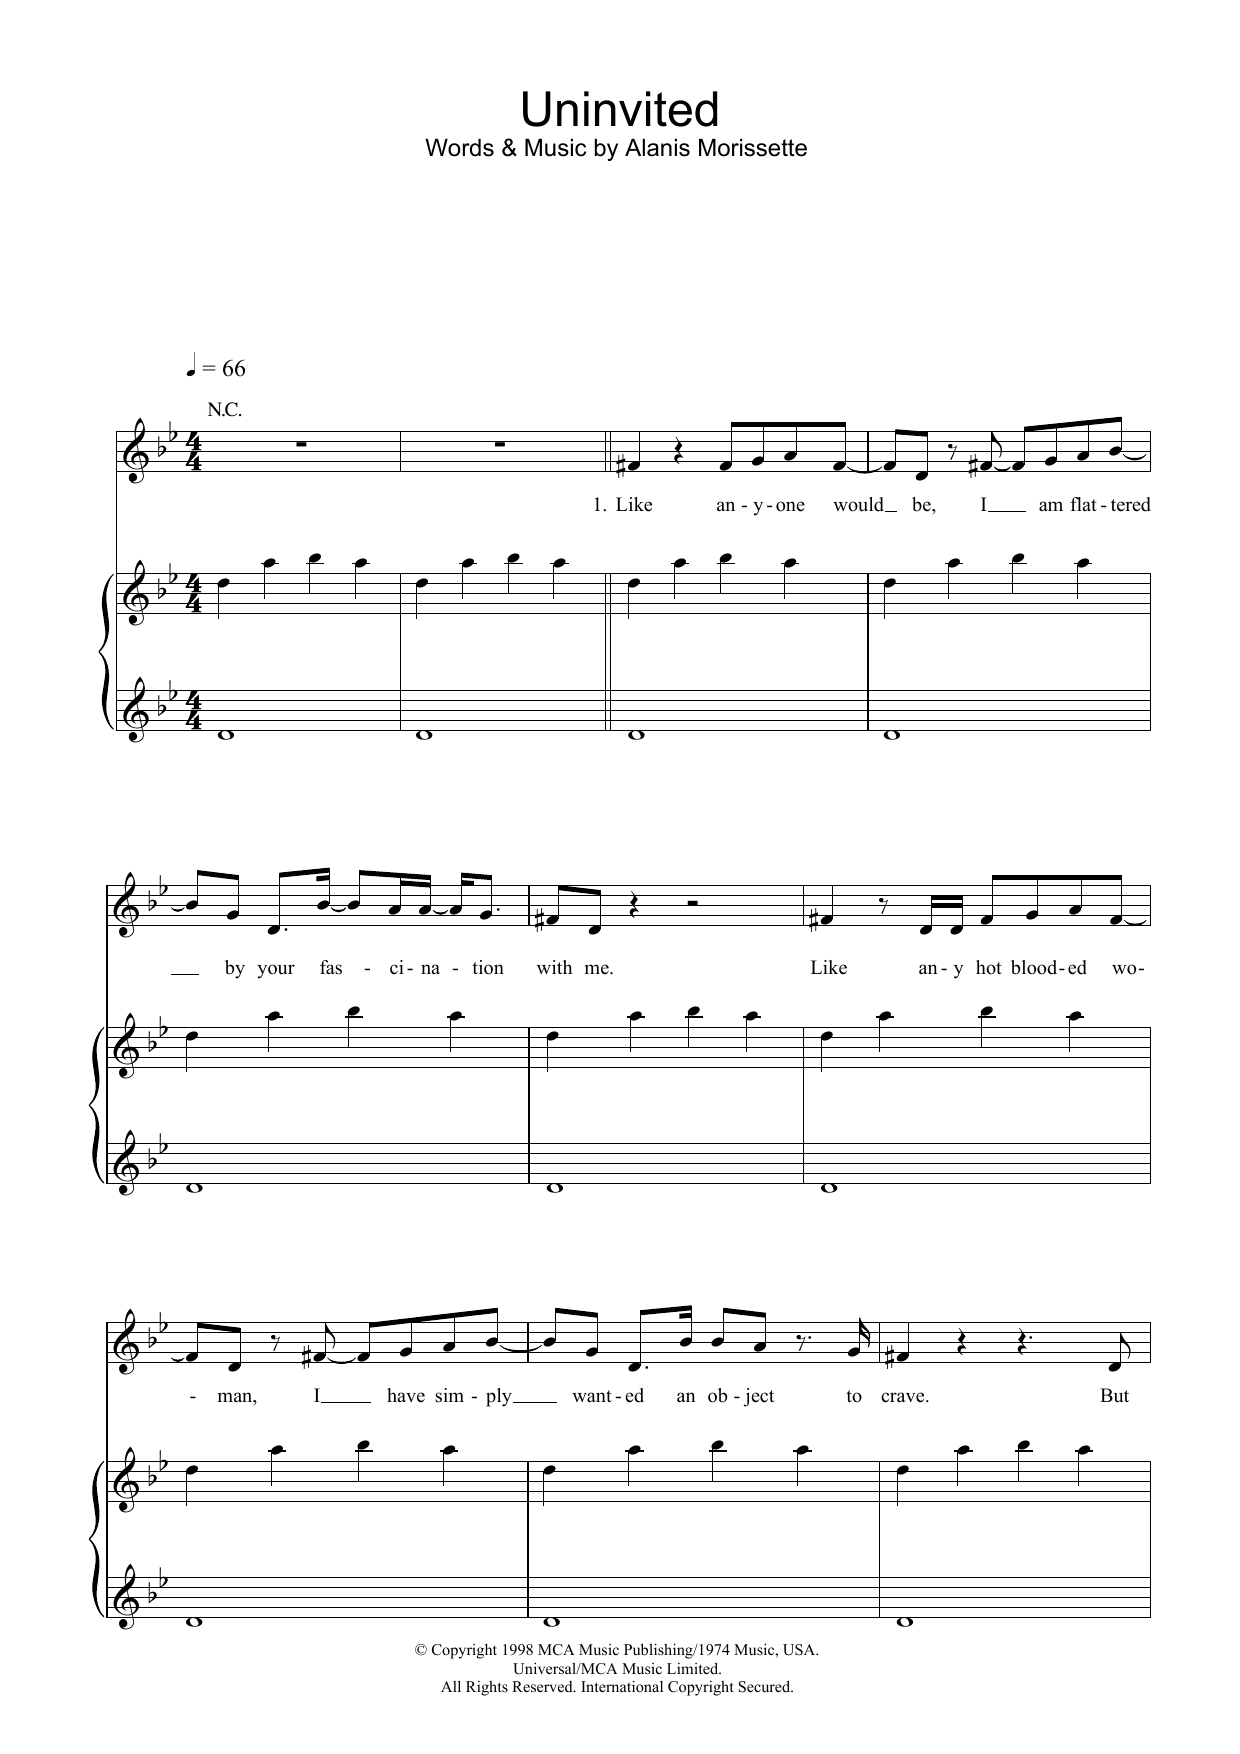 Alanis Morissette Uninvited sheet music notes and chords. Download Printable PDF.